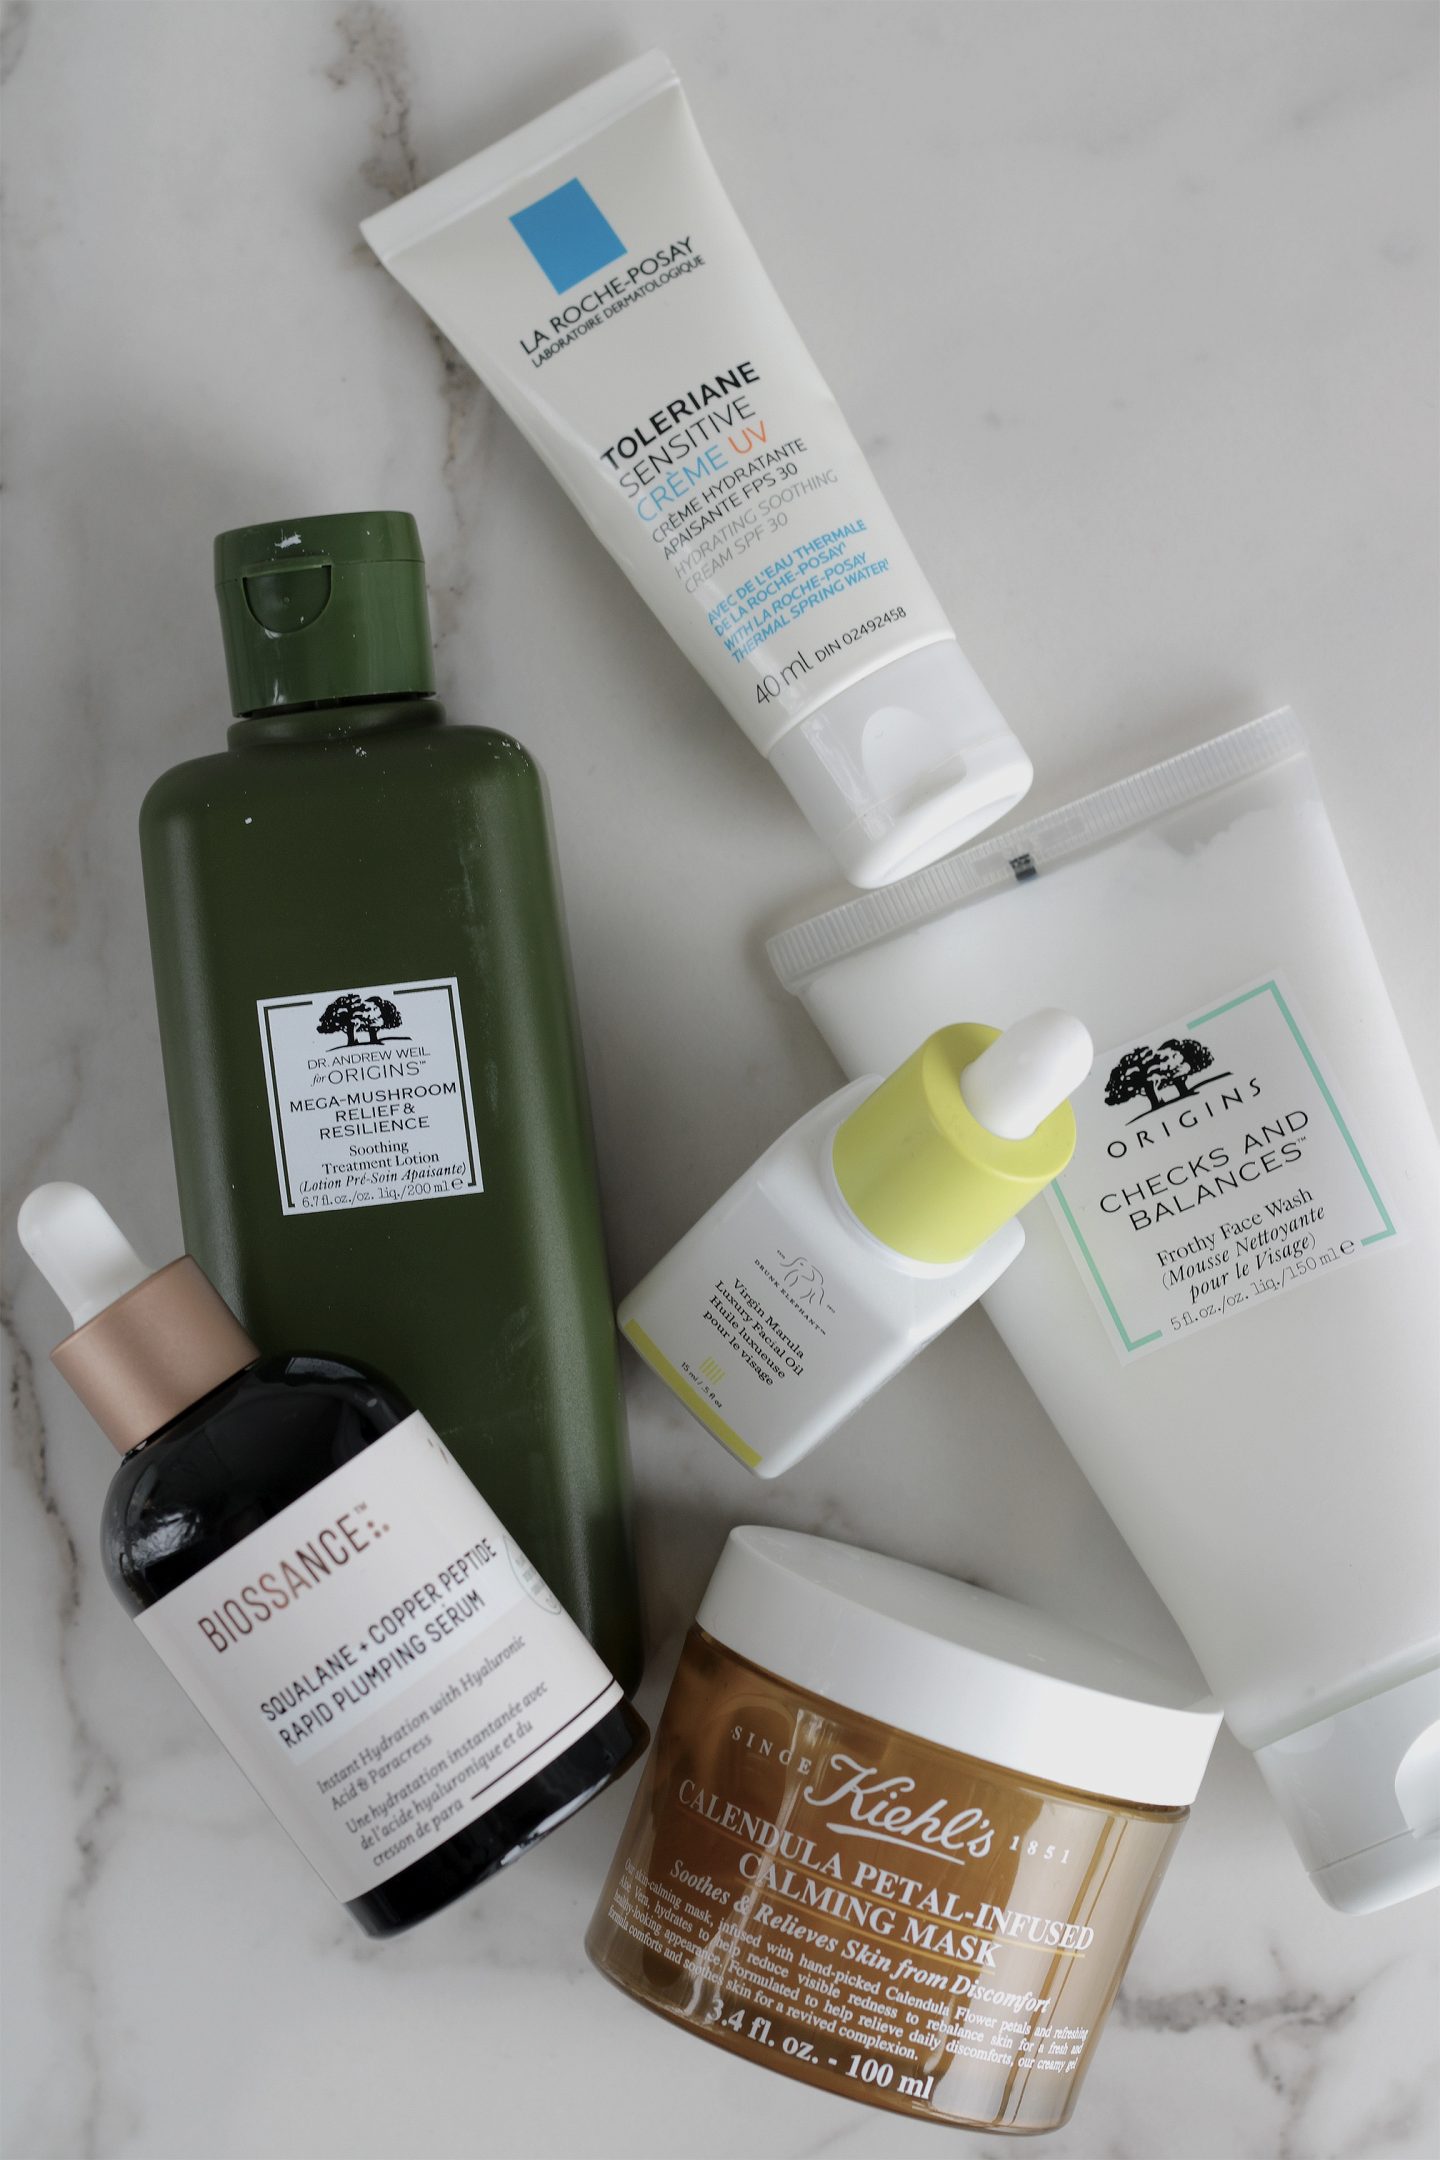 My Calming Skincare Product Recommendations